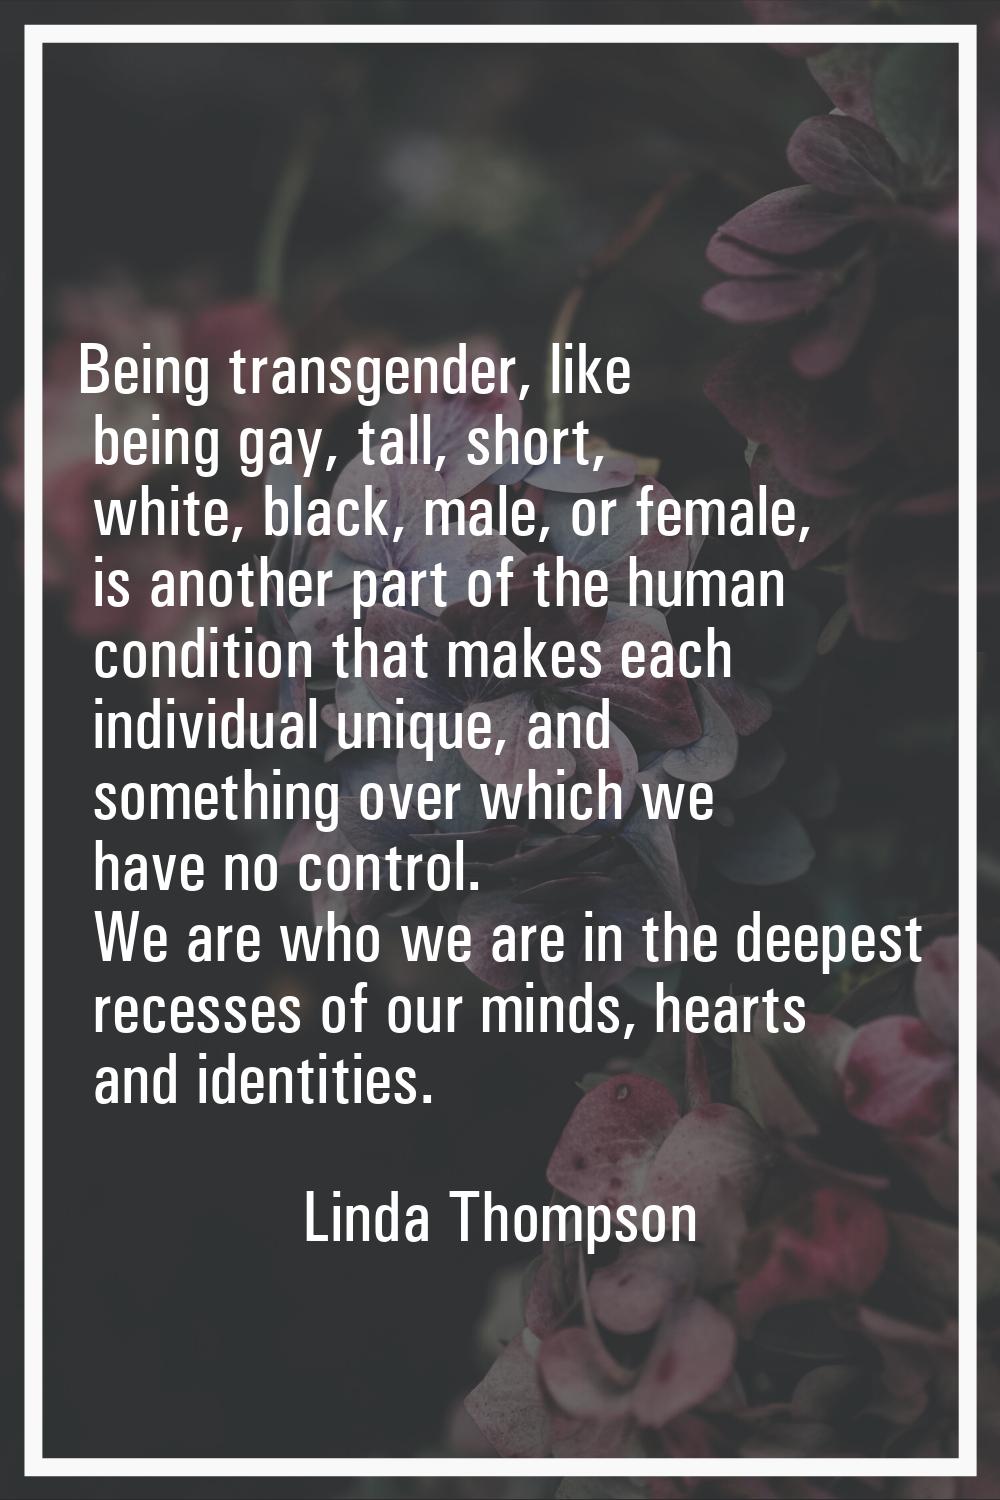 Being transgender, like being gay, tall, short, white, black, male, or female, is another part of t